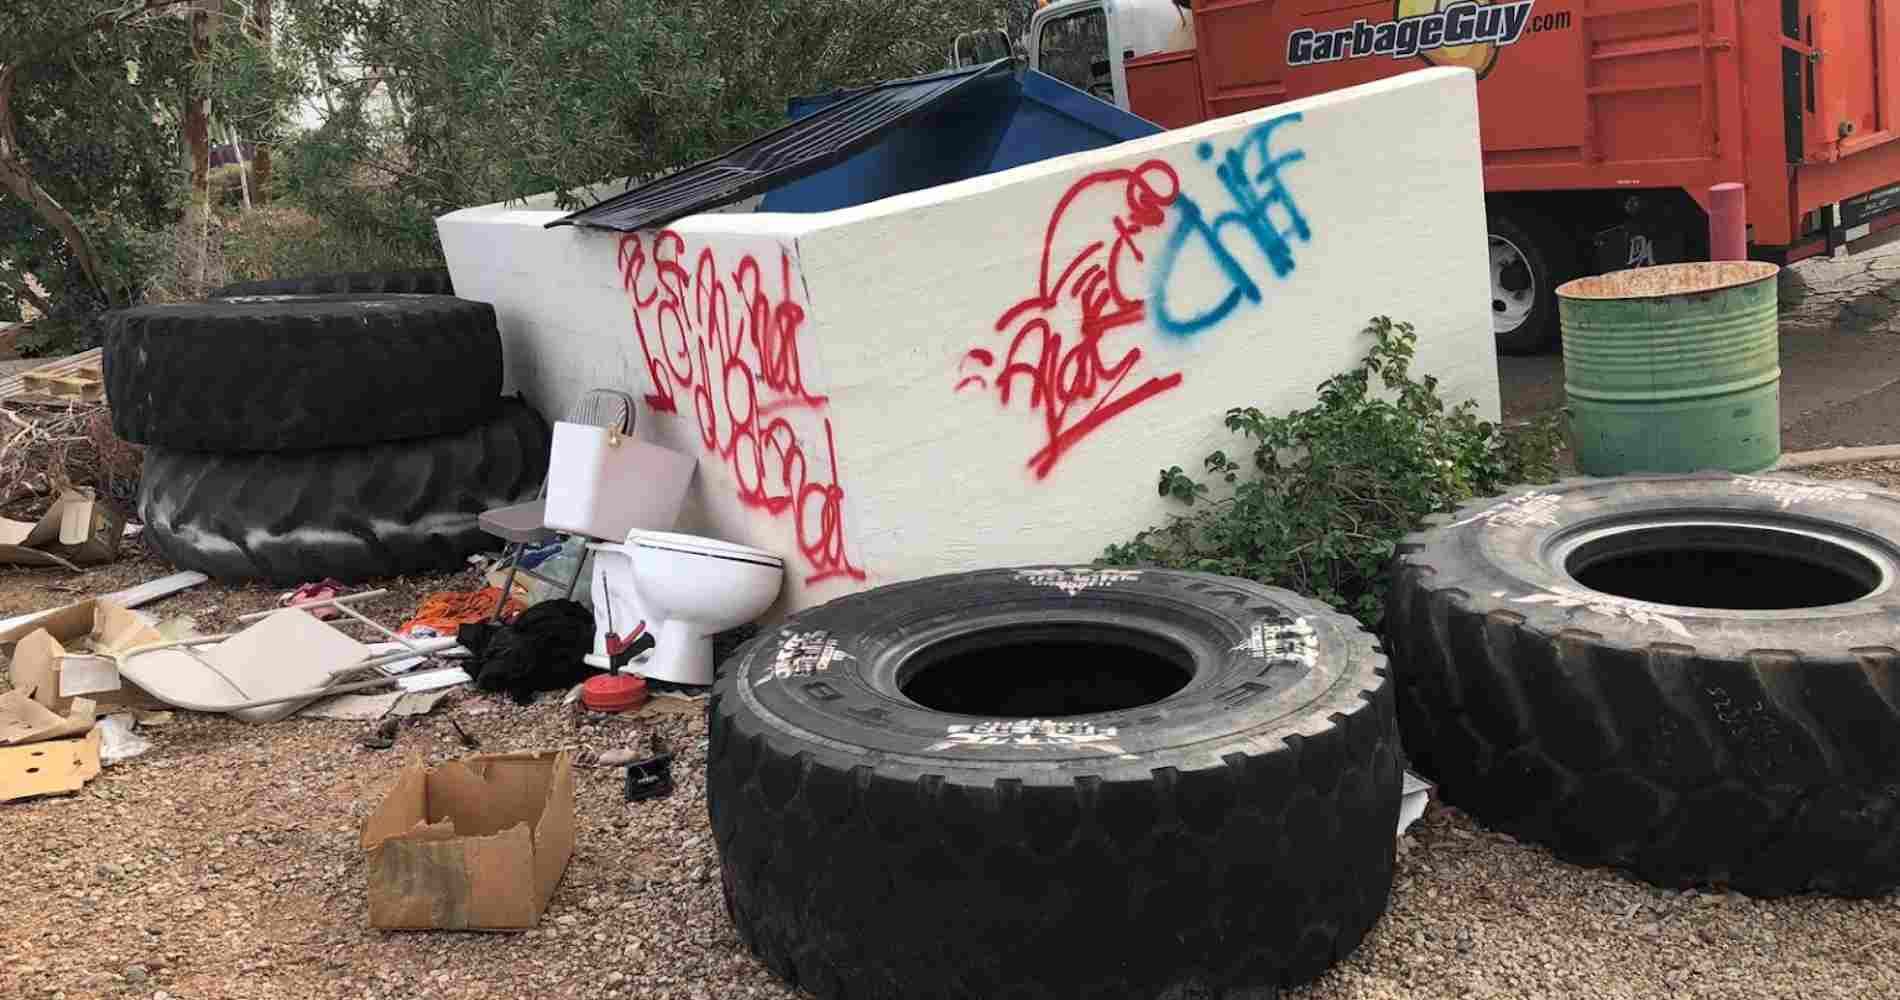 #1 for Tire Disposal in Litchfield Park, AZ with Over 1200 5-Star Reviews!